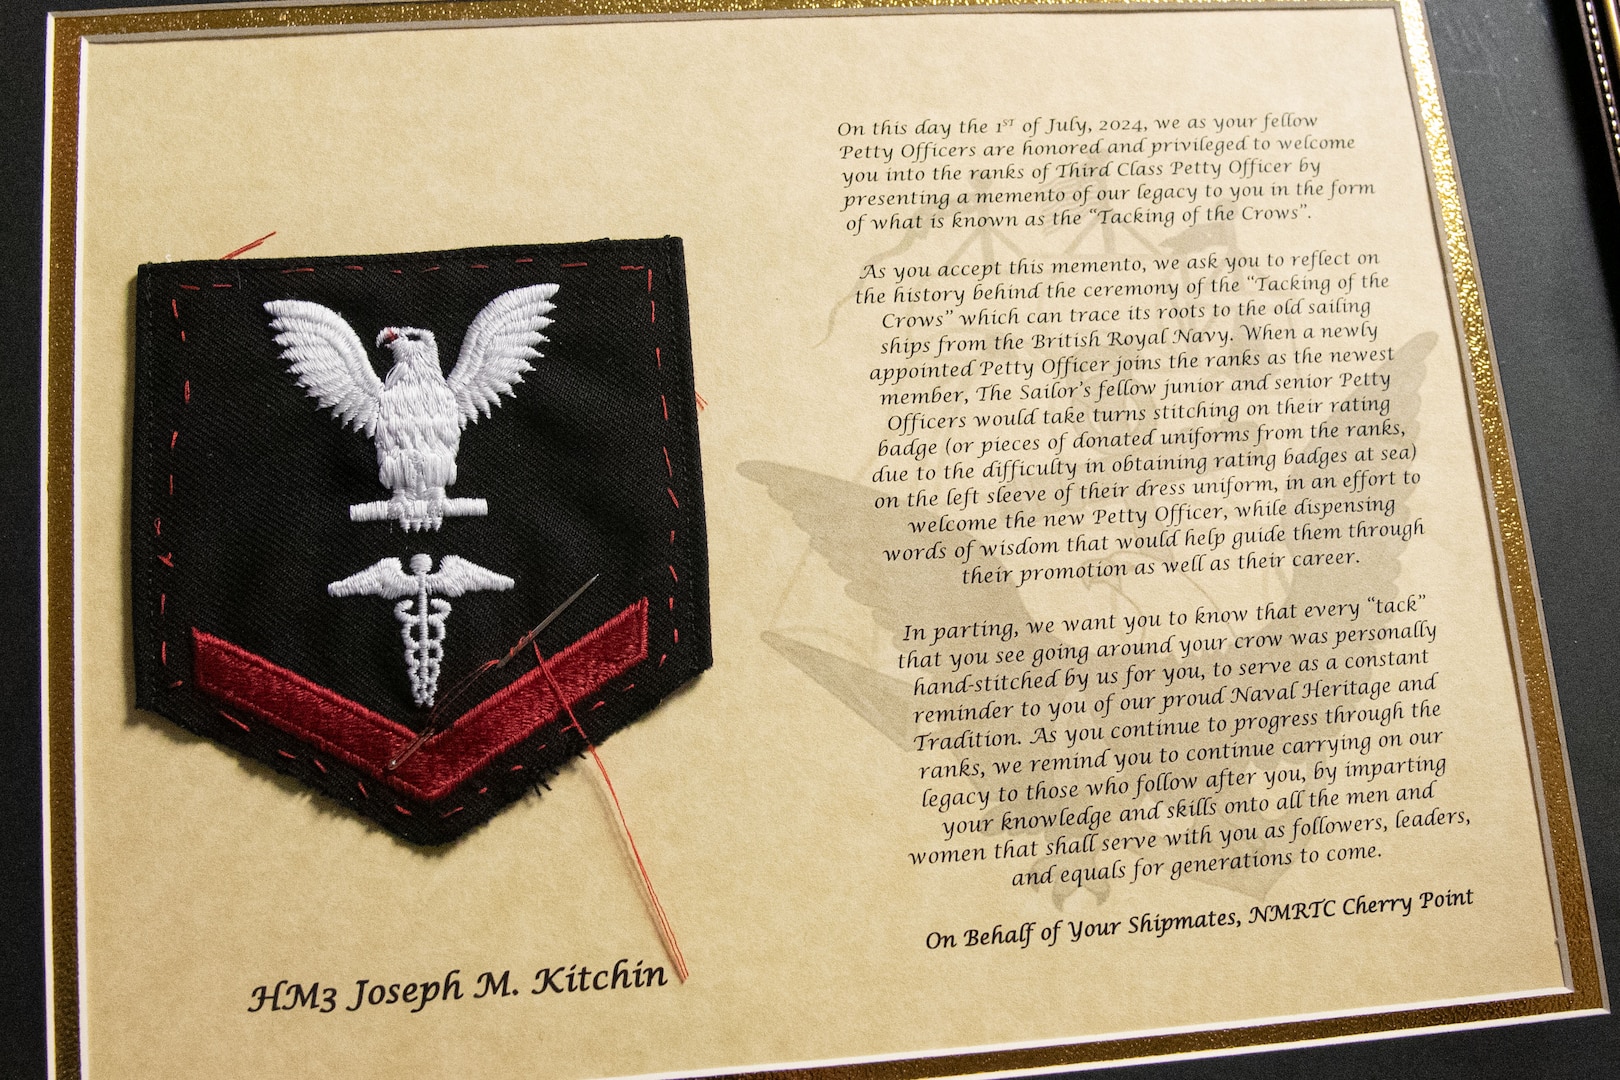 The "Tacking of the Crow" certificate presented to Hospital Corpsman Third Class Joseph Kitchin at his promotion Monday, July 1, 2024.